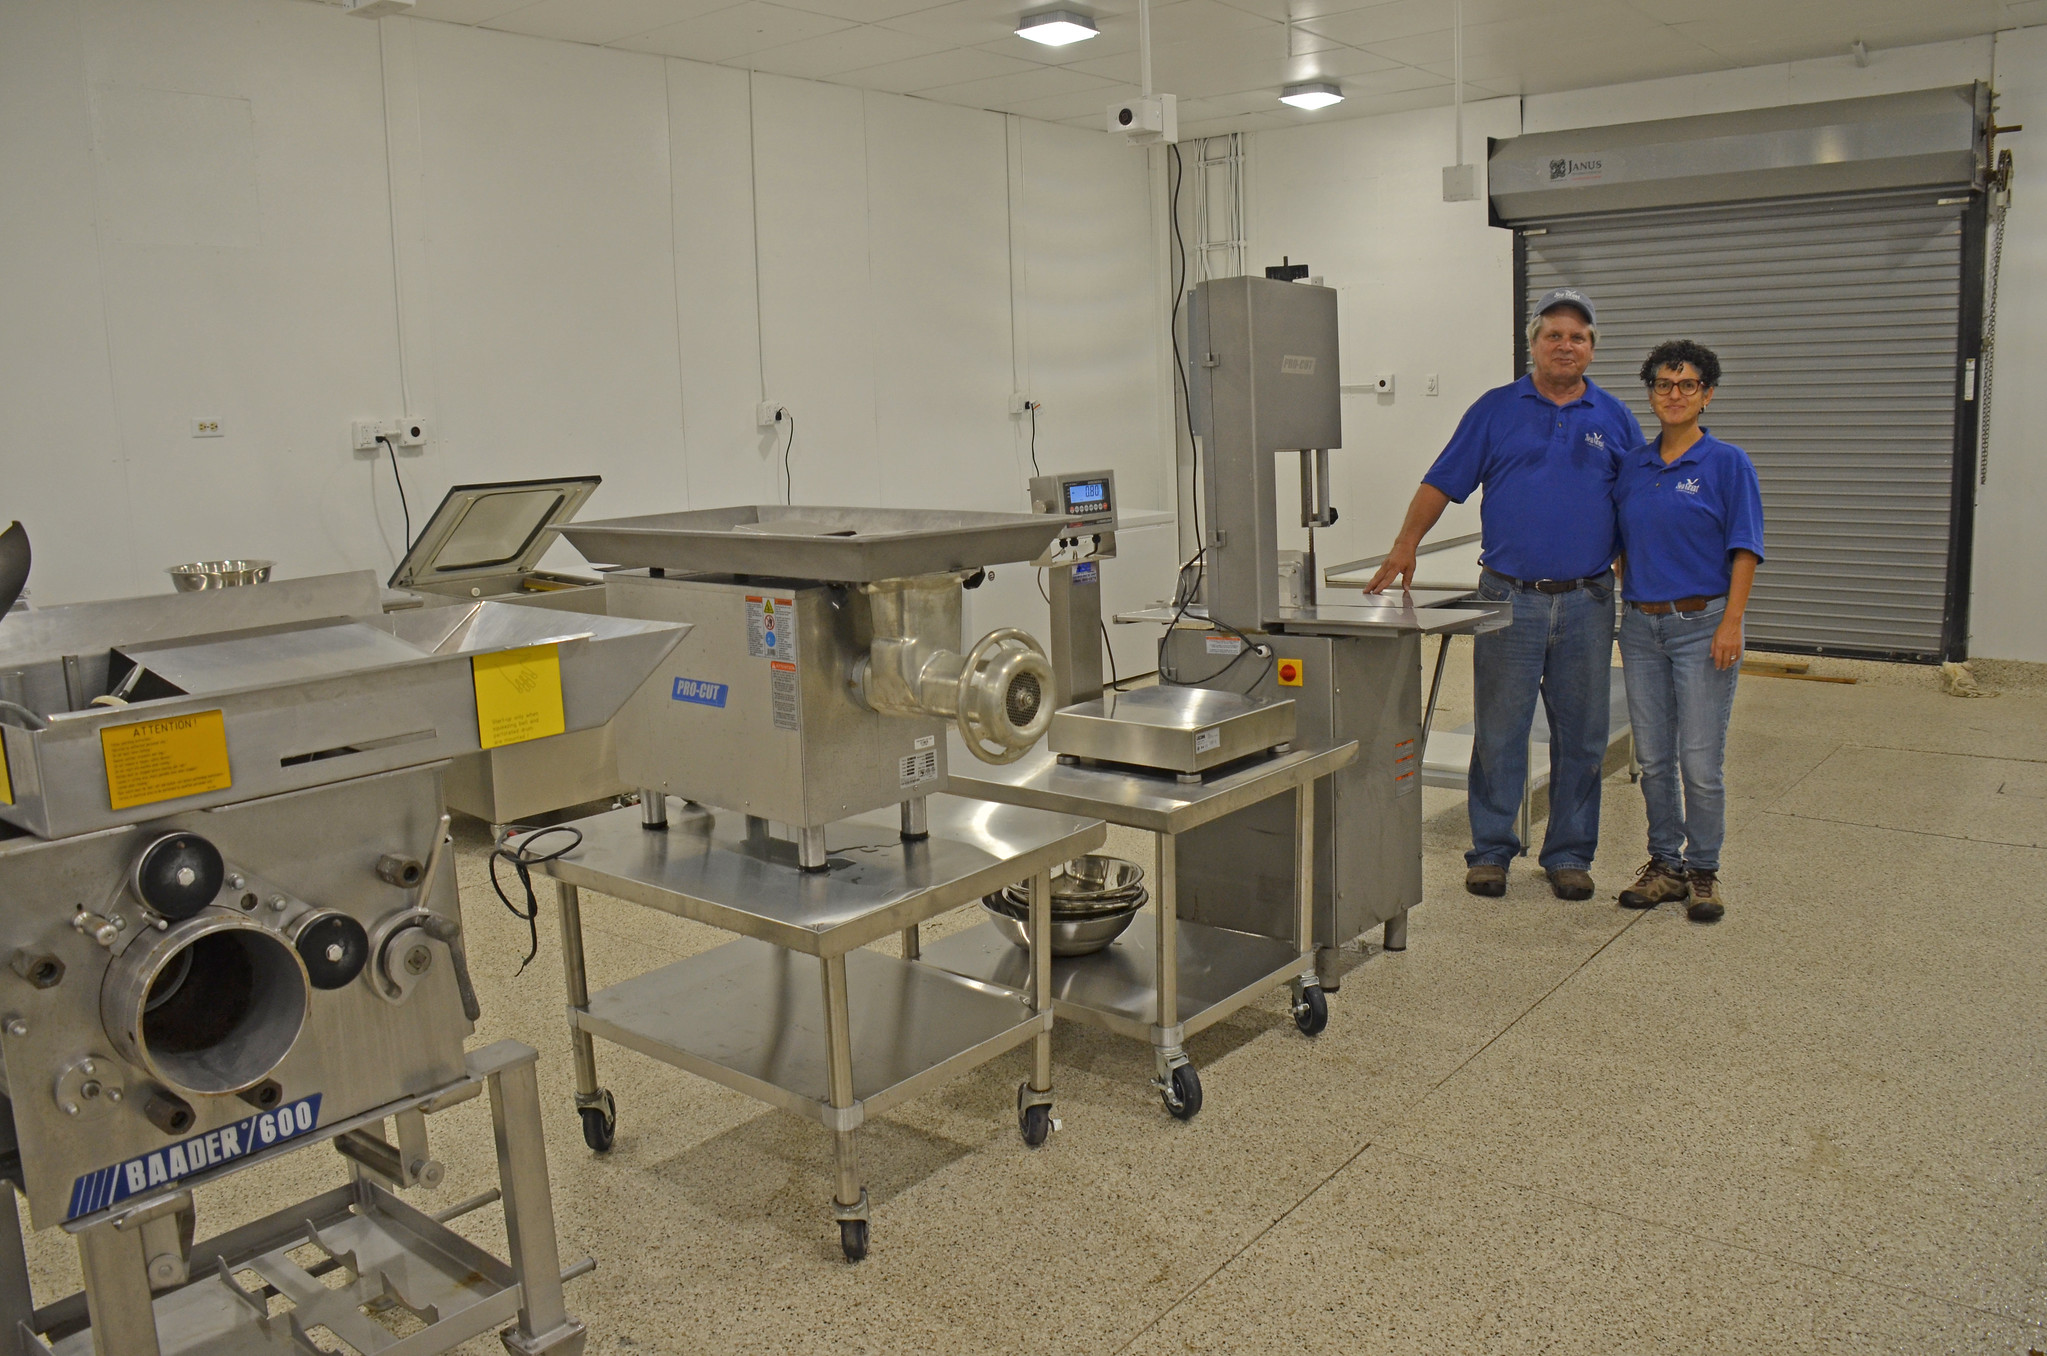 Dr. Evelyn Watts and Thomas Hymel, directors, standing next to equipment in the Seafood Processing Demonstration Lab